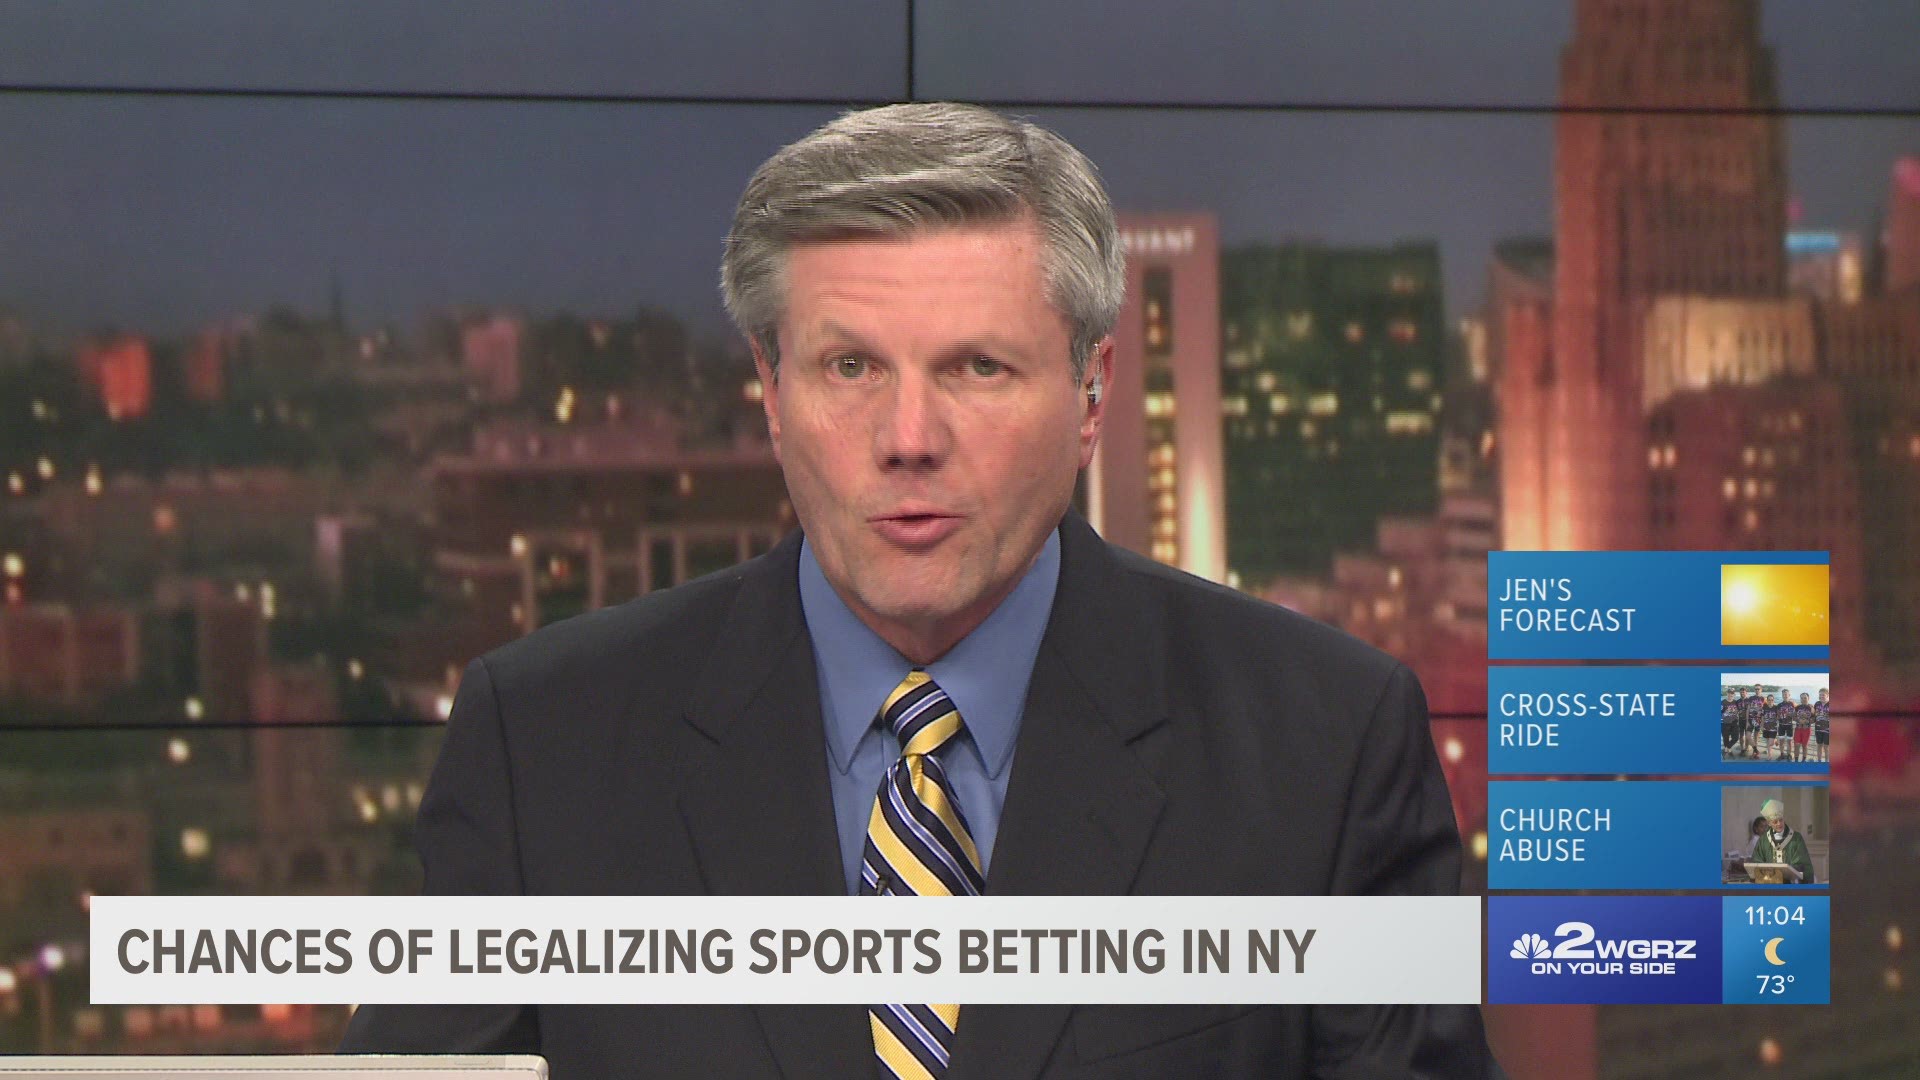 Chances of legalizing sports betting in NYS